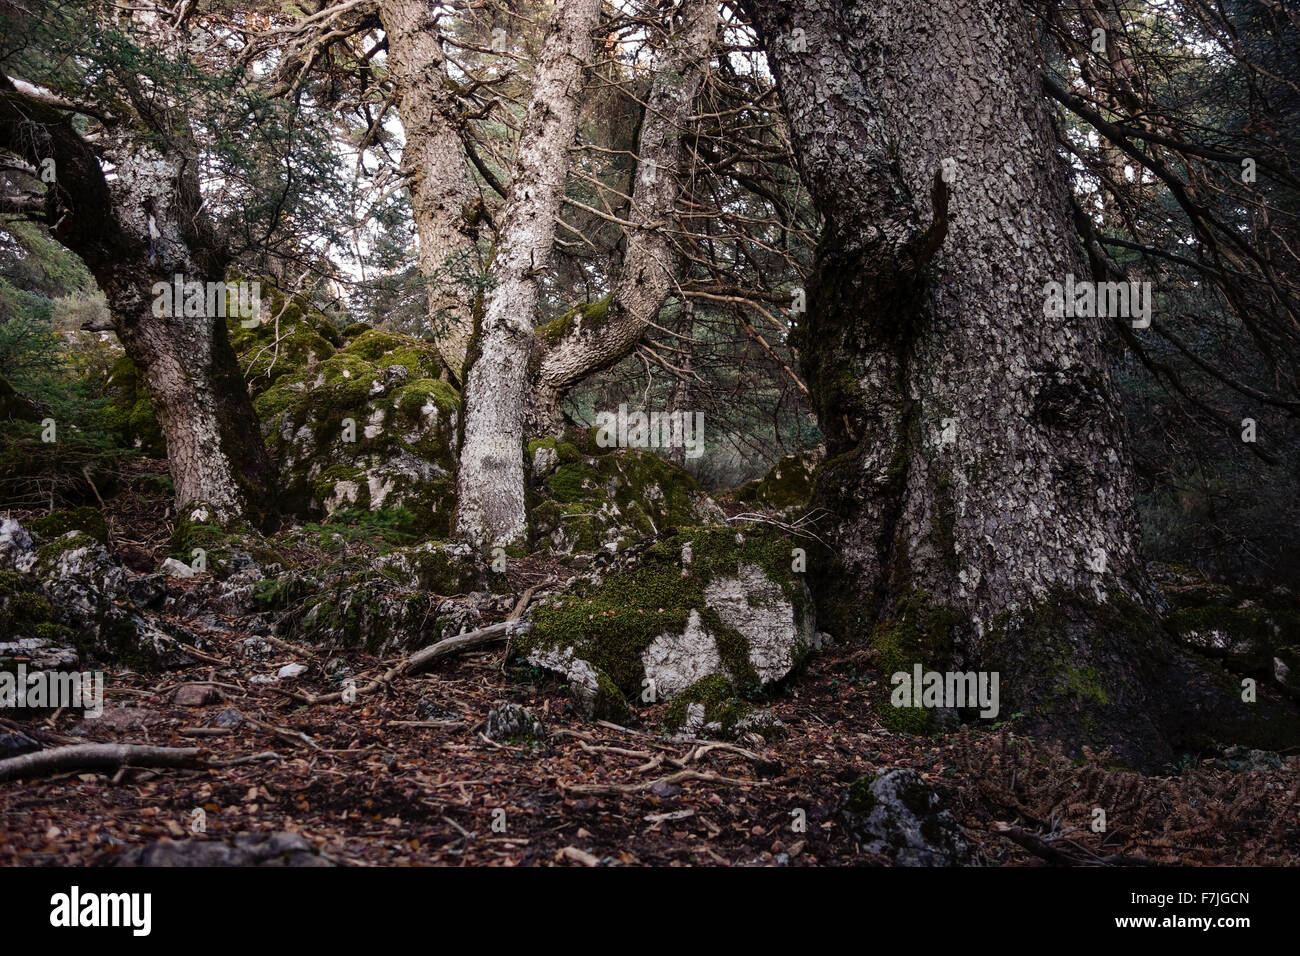 Forest in Natural park, Sierra de las Nieves with spanish fir trees, Malaga, Andalusia, Spain. Stock Photo